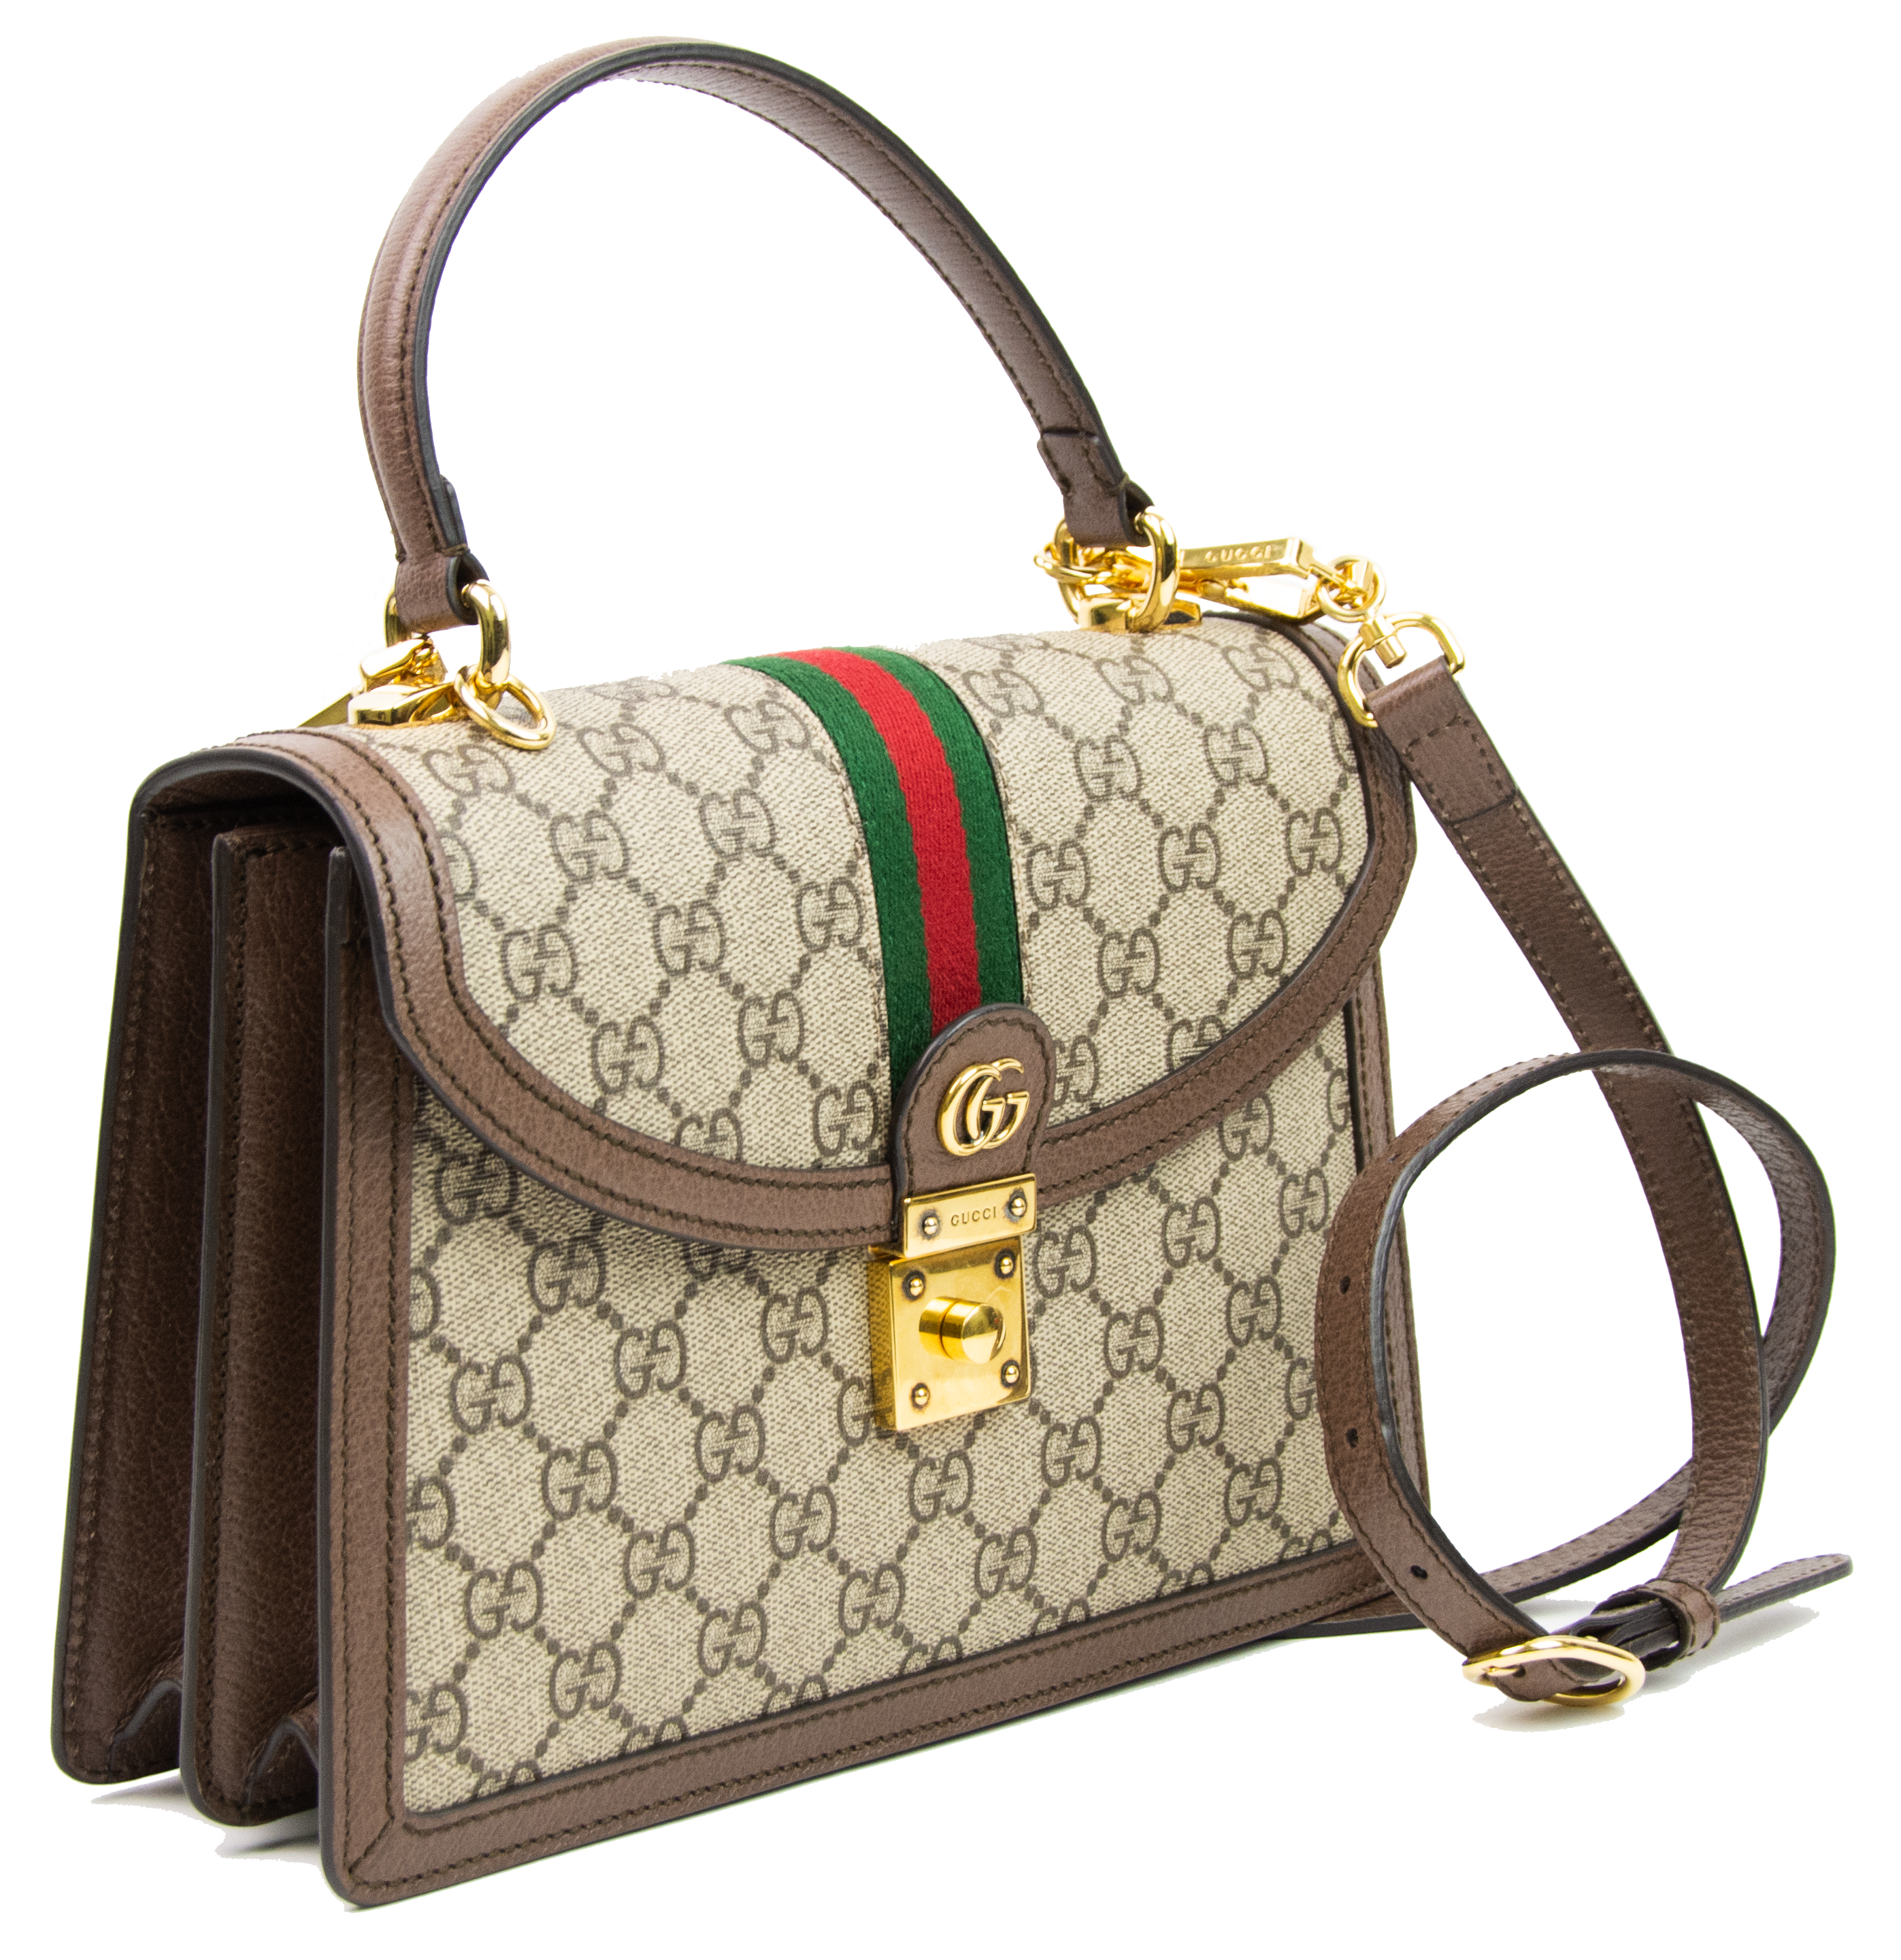 Gucci Ophidia Small Top Handheld Bag